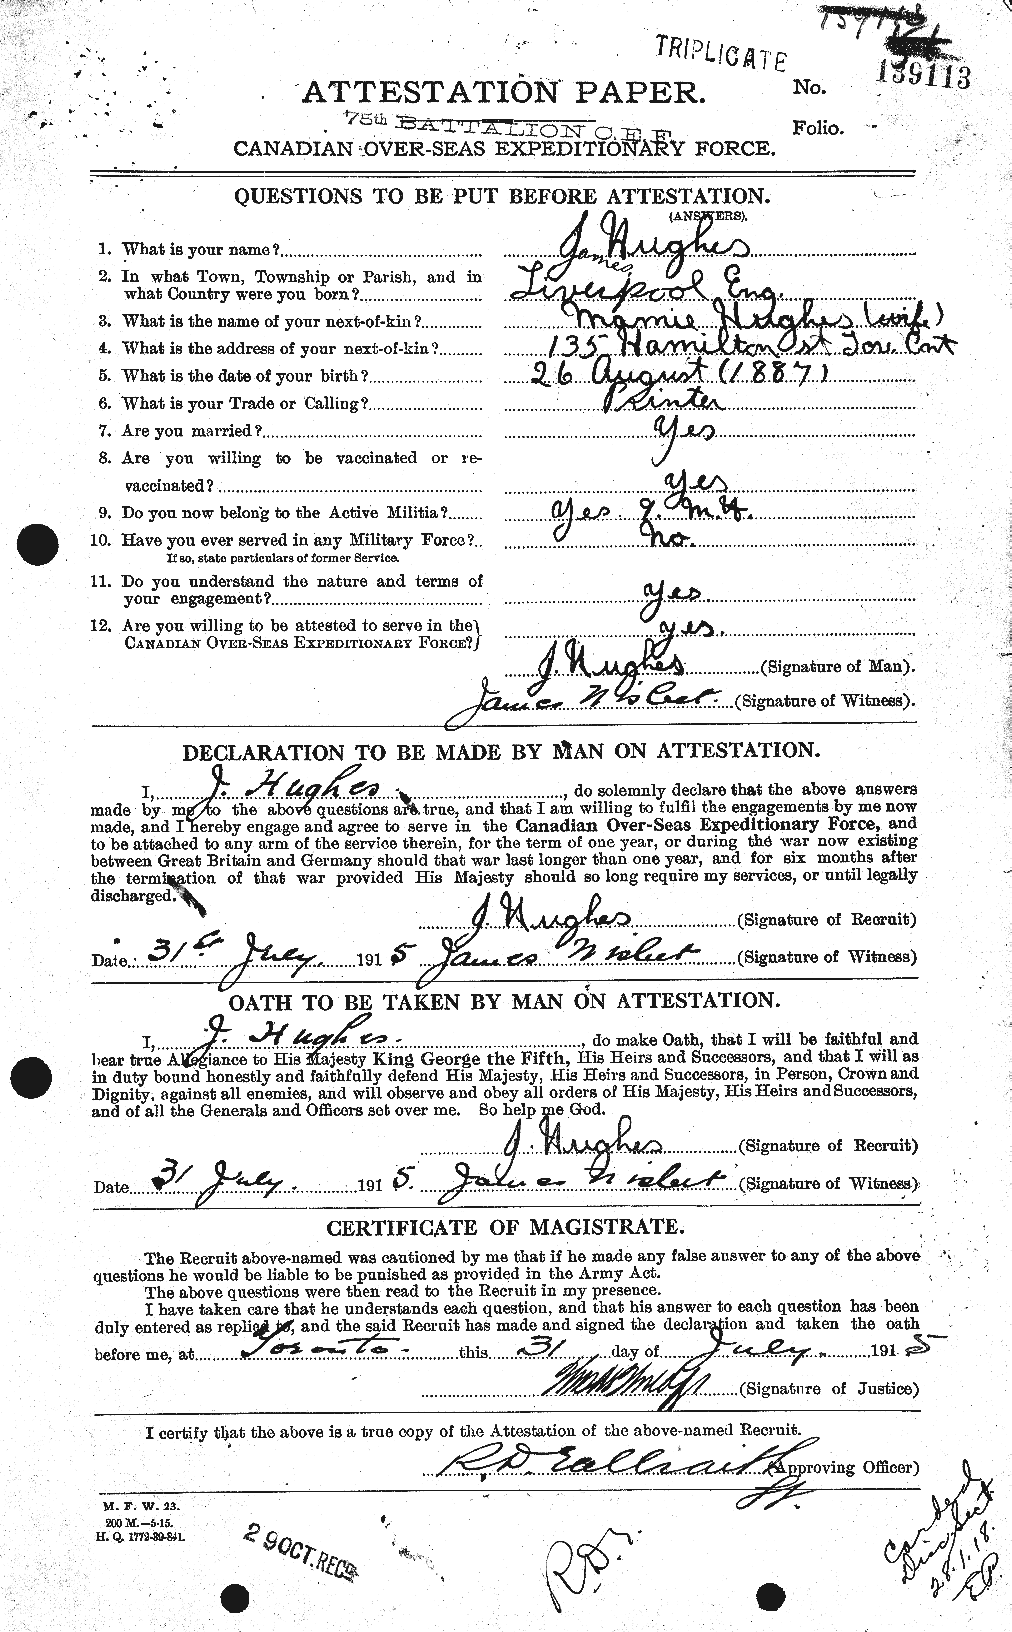 Personnel Records of the First World War - CEF 403949a